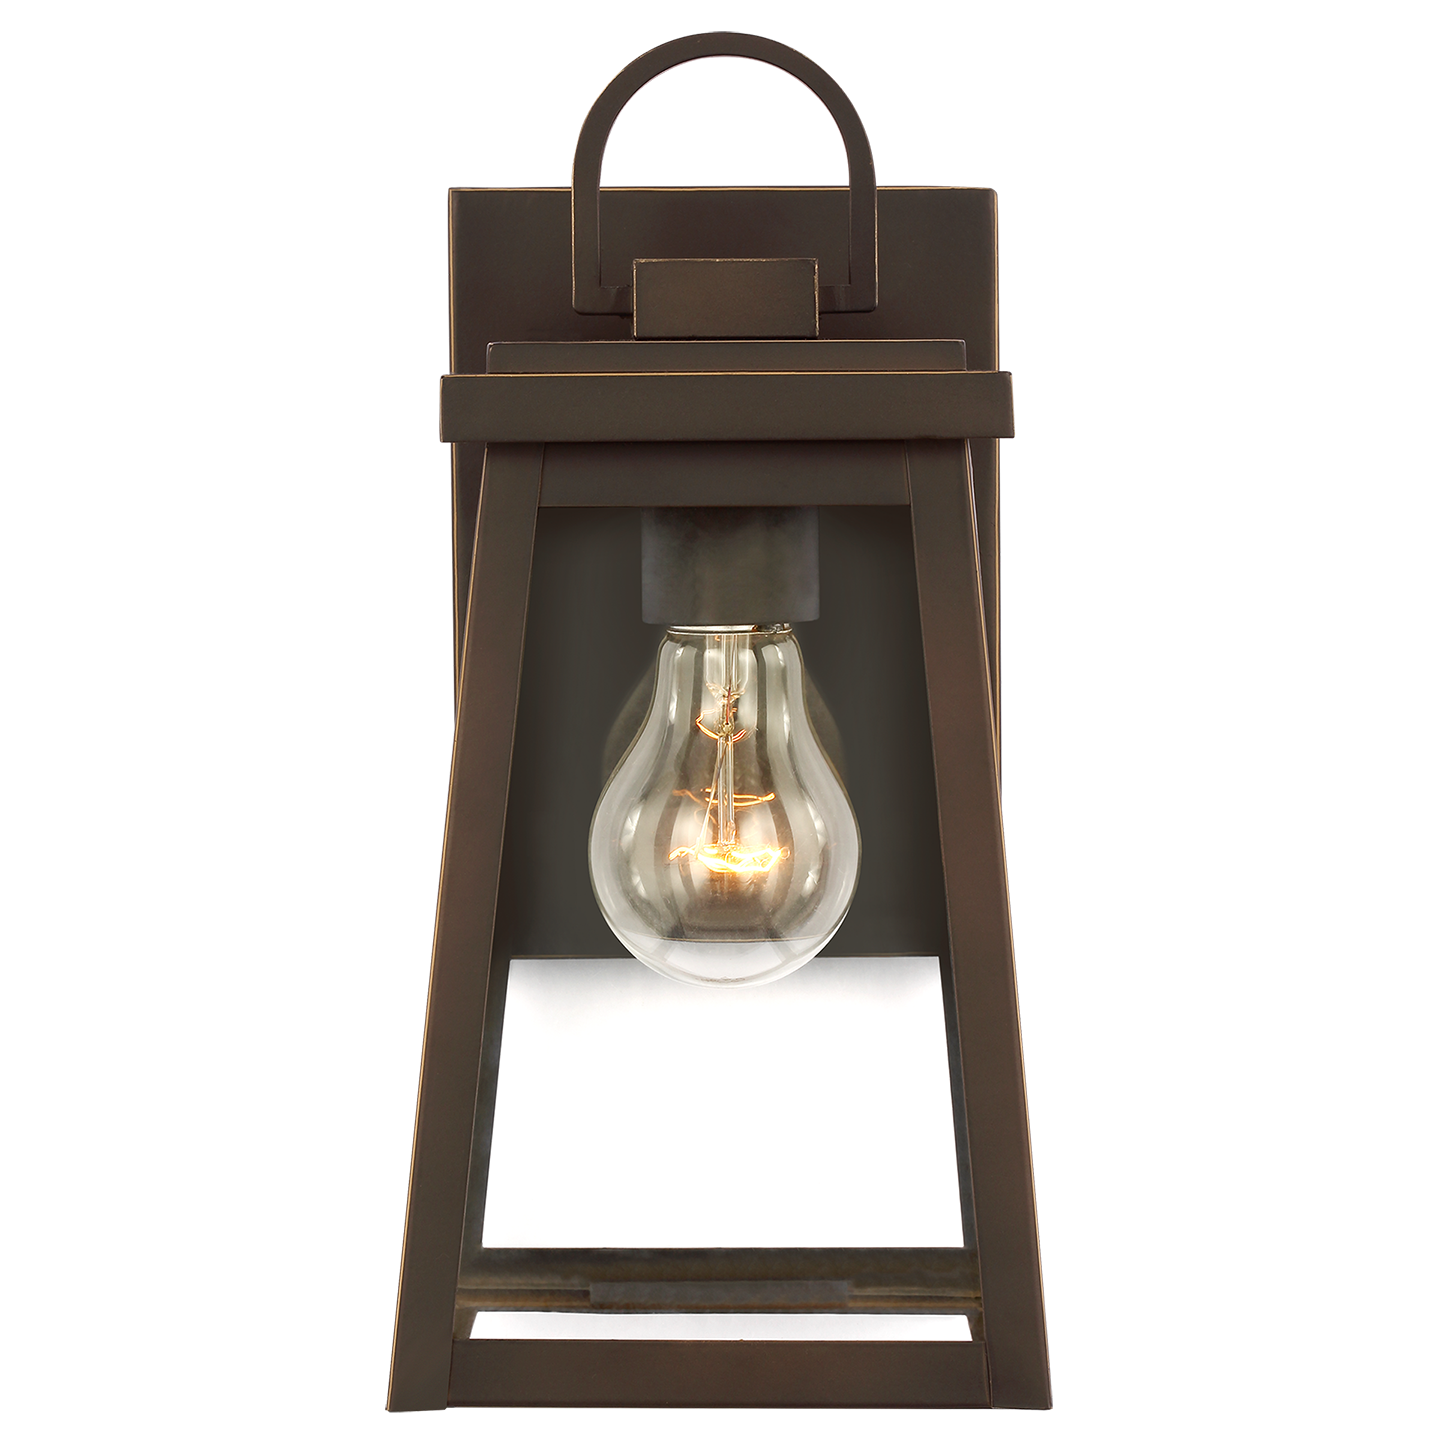 Founders 1-Light Small Outdoor Wall Lantern (with Bulbs)